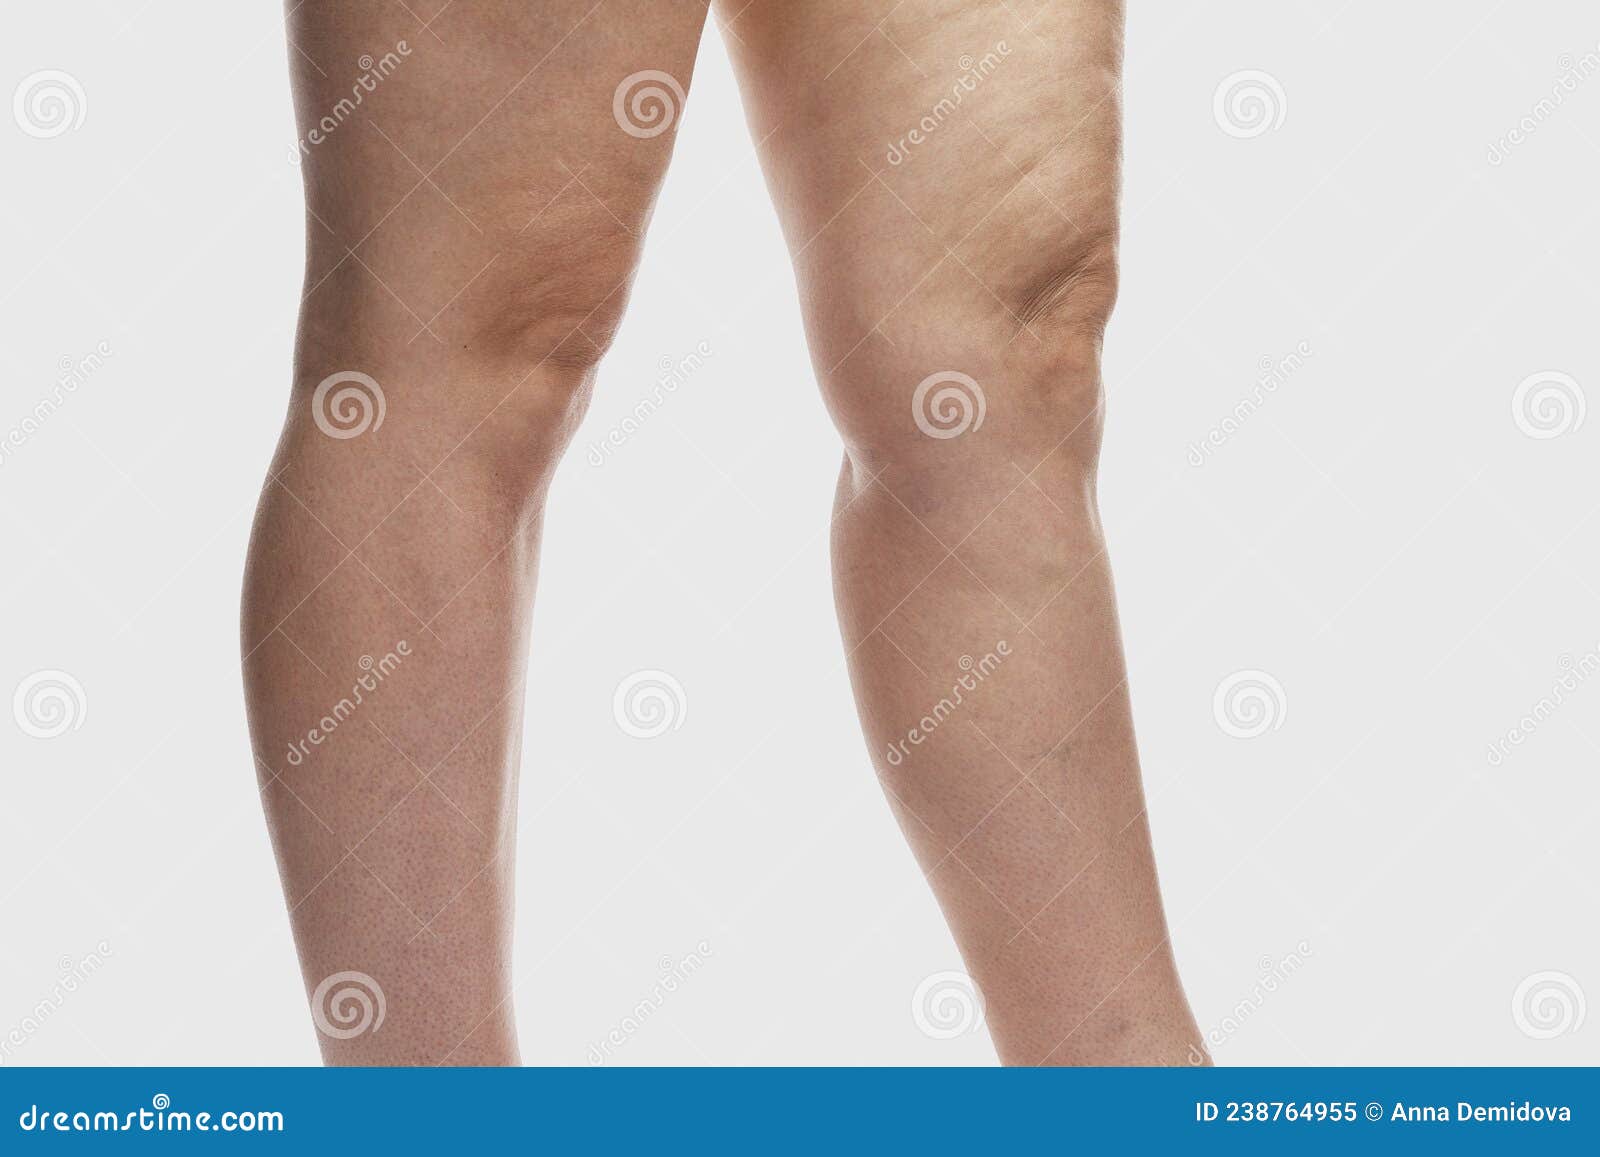 Thick Female Legs With Cellulite And Varicose Veins Overweight And Disease Close Up On A